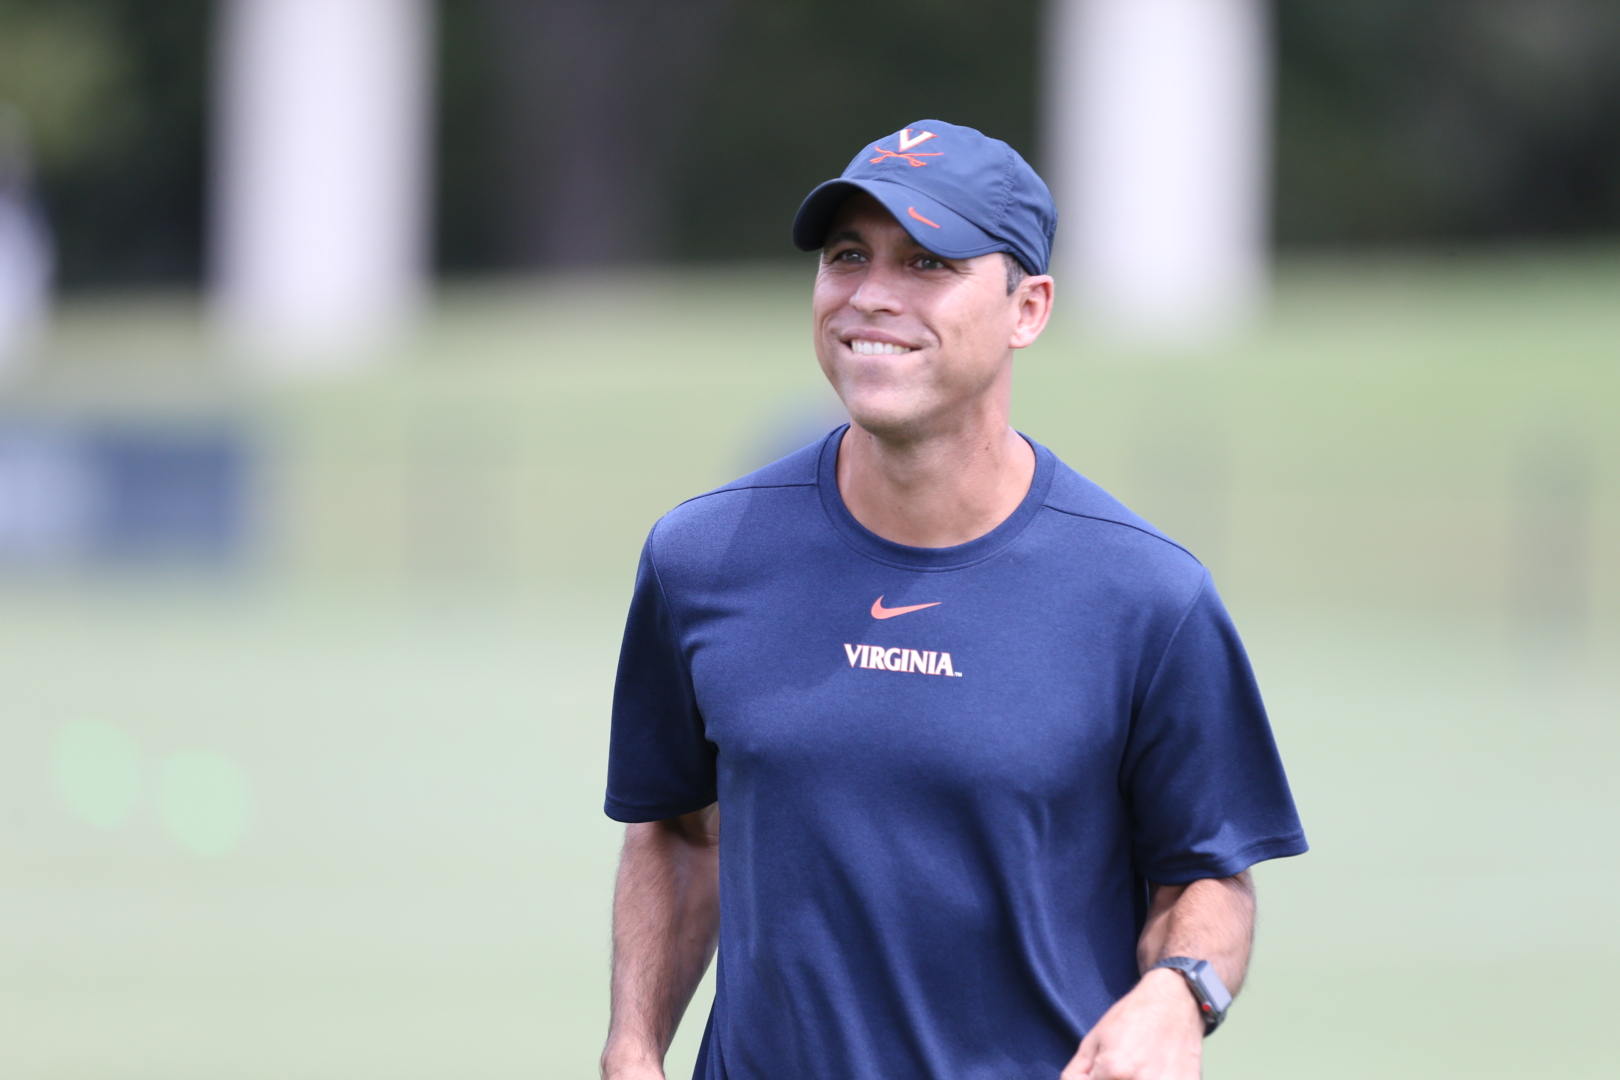 Former Virginia assistant coach Jaime Frias has been named the new head coach of UH Soccer, taking over following the retirement of Diego Bocanegra. | Courtesy of Virginia Athletics